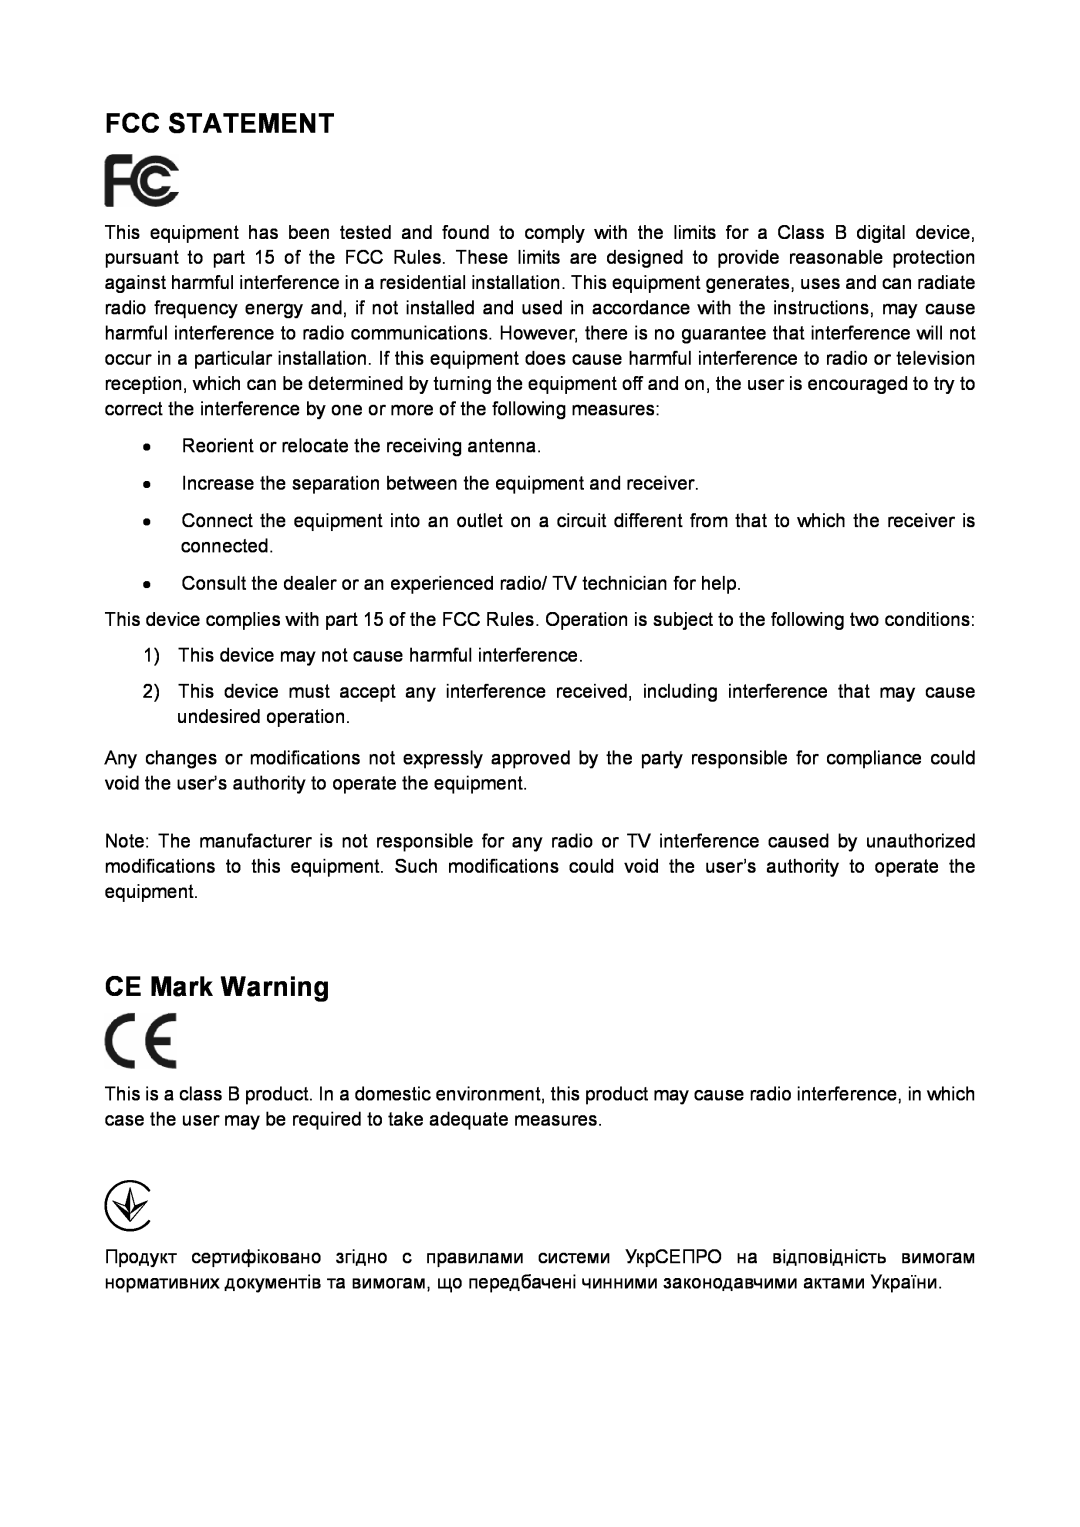 TP-Link TL-PA4010P manual Fcc Statement, CE Mark Warning 